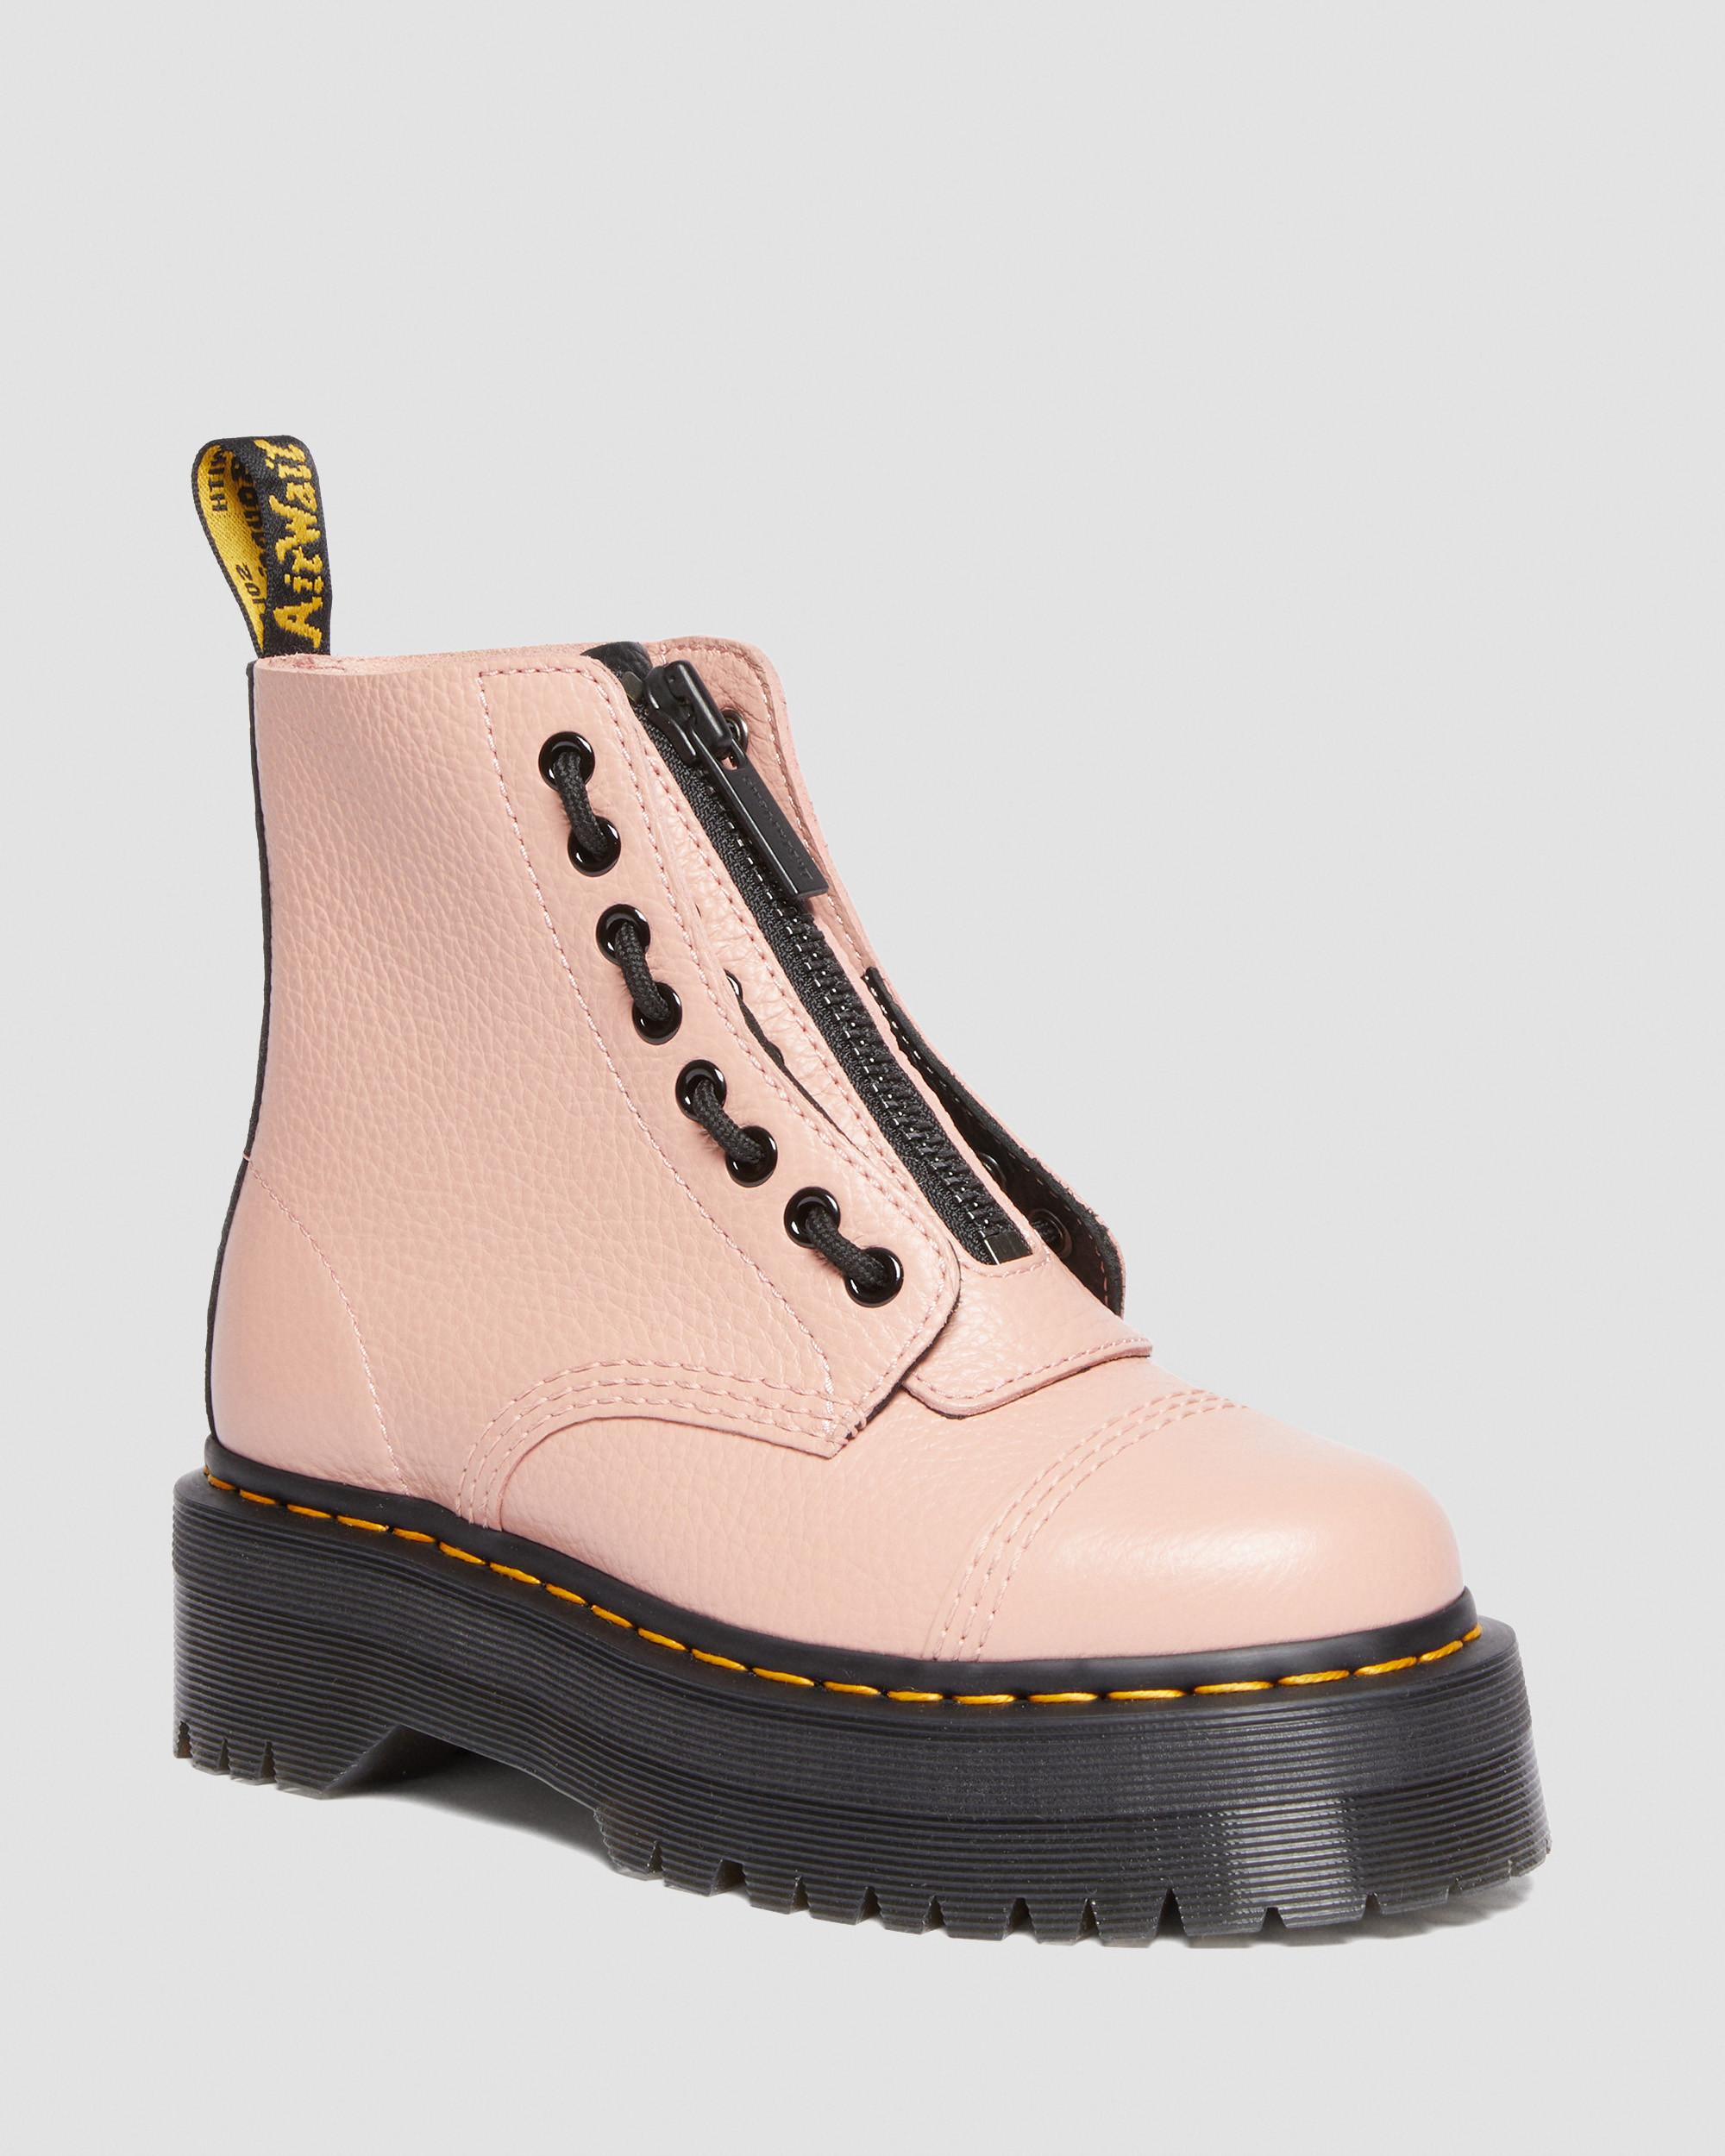 Dr. Martens' Sinclair Flatform Boots In Peach Leather-orange In Pink